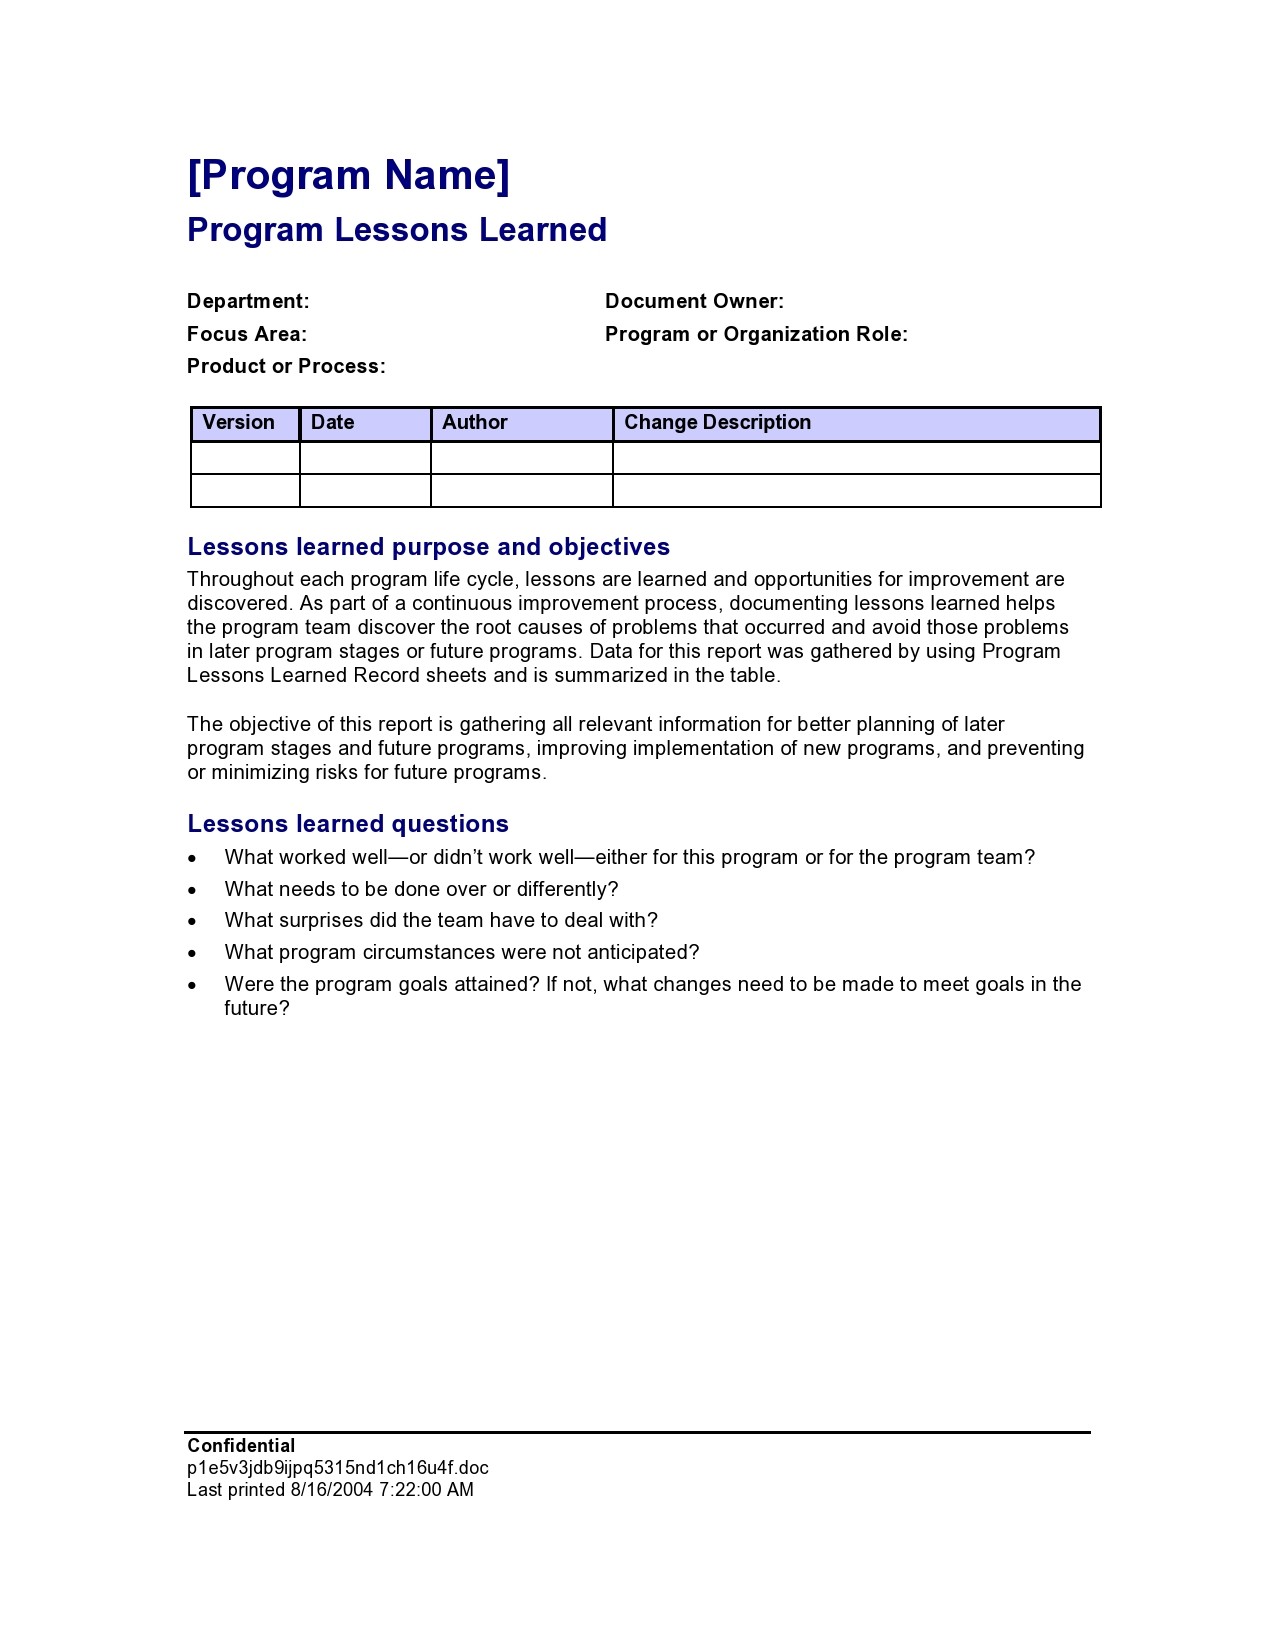 Free lessons learned template 10